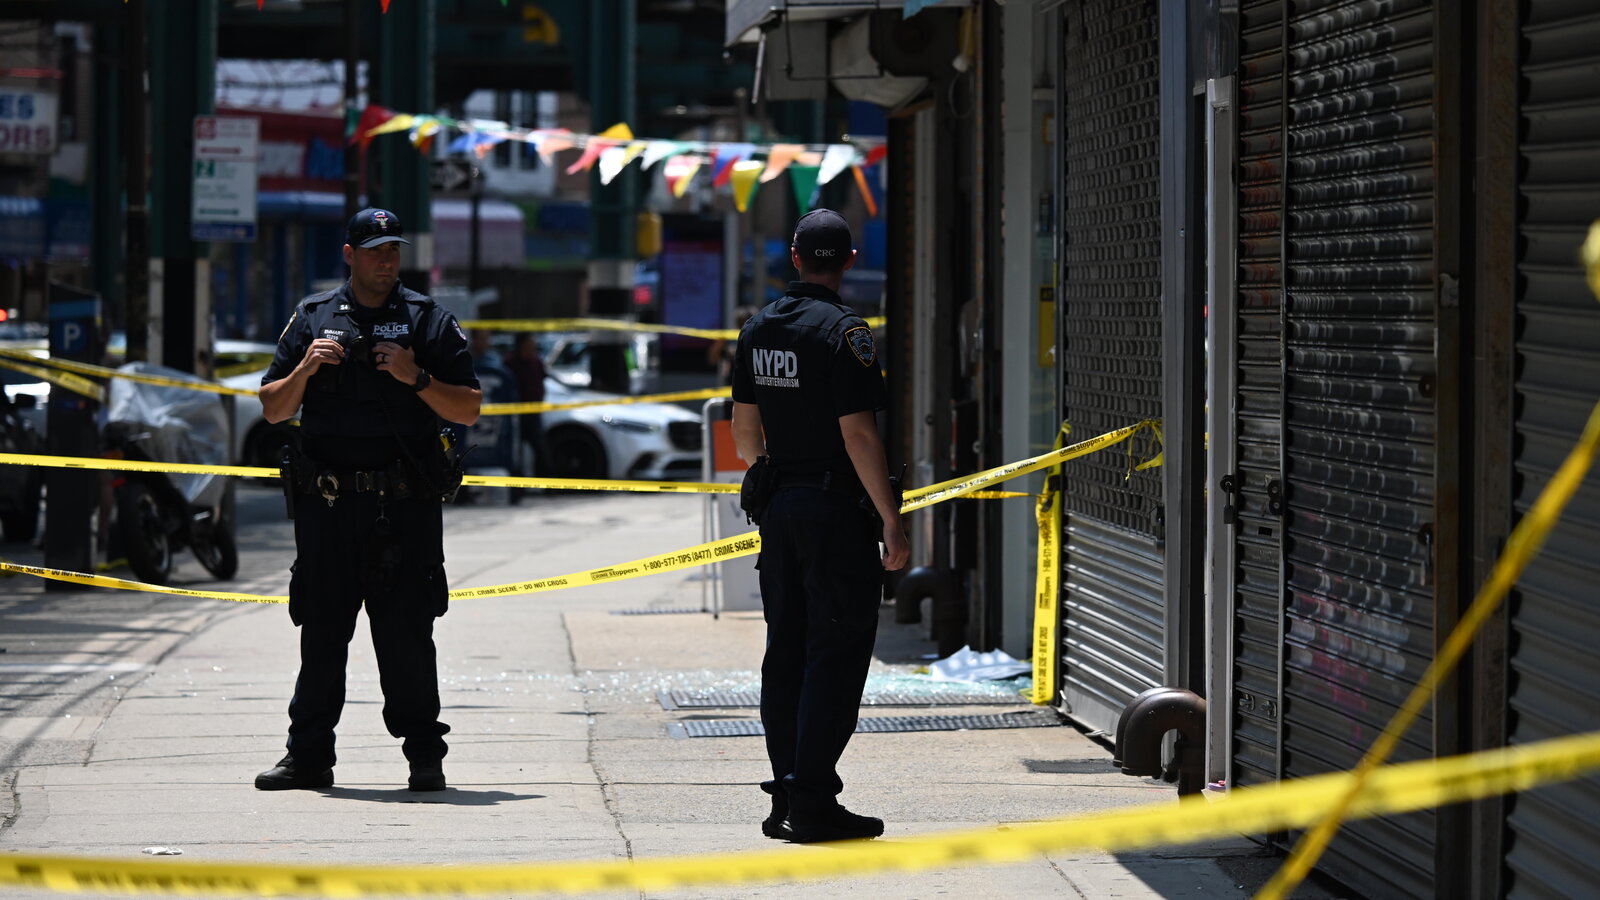 Queens Man Fatally Shoots Brother, Injures Mother